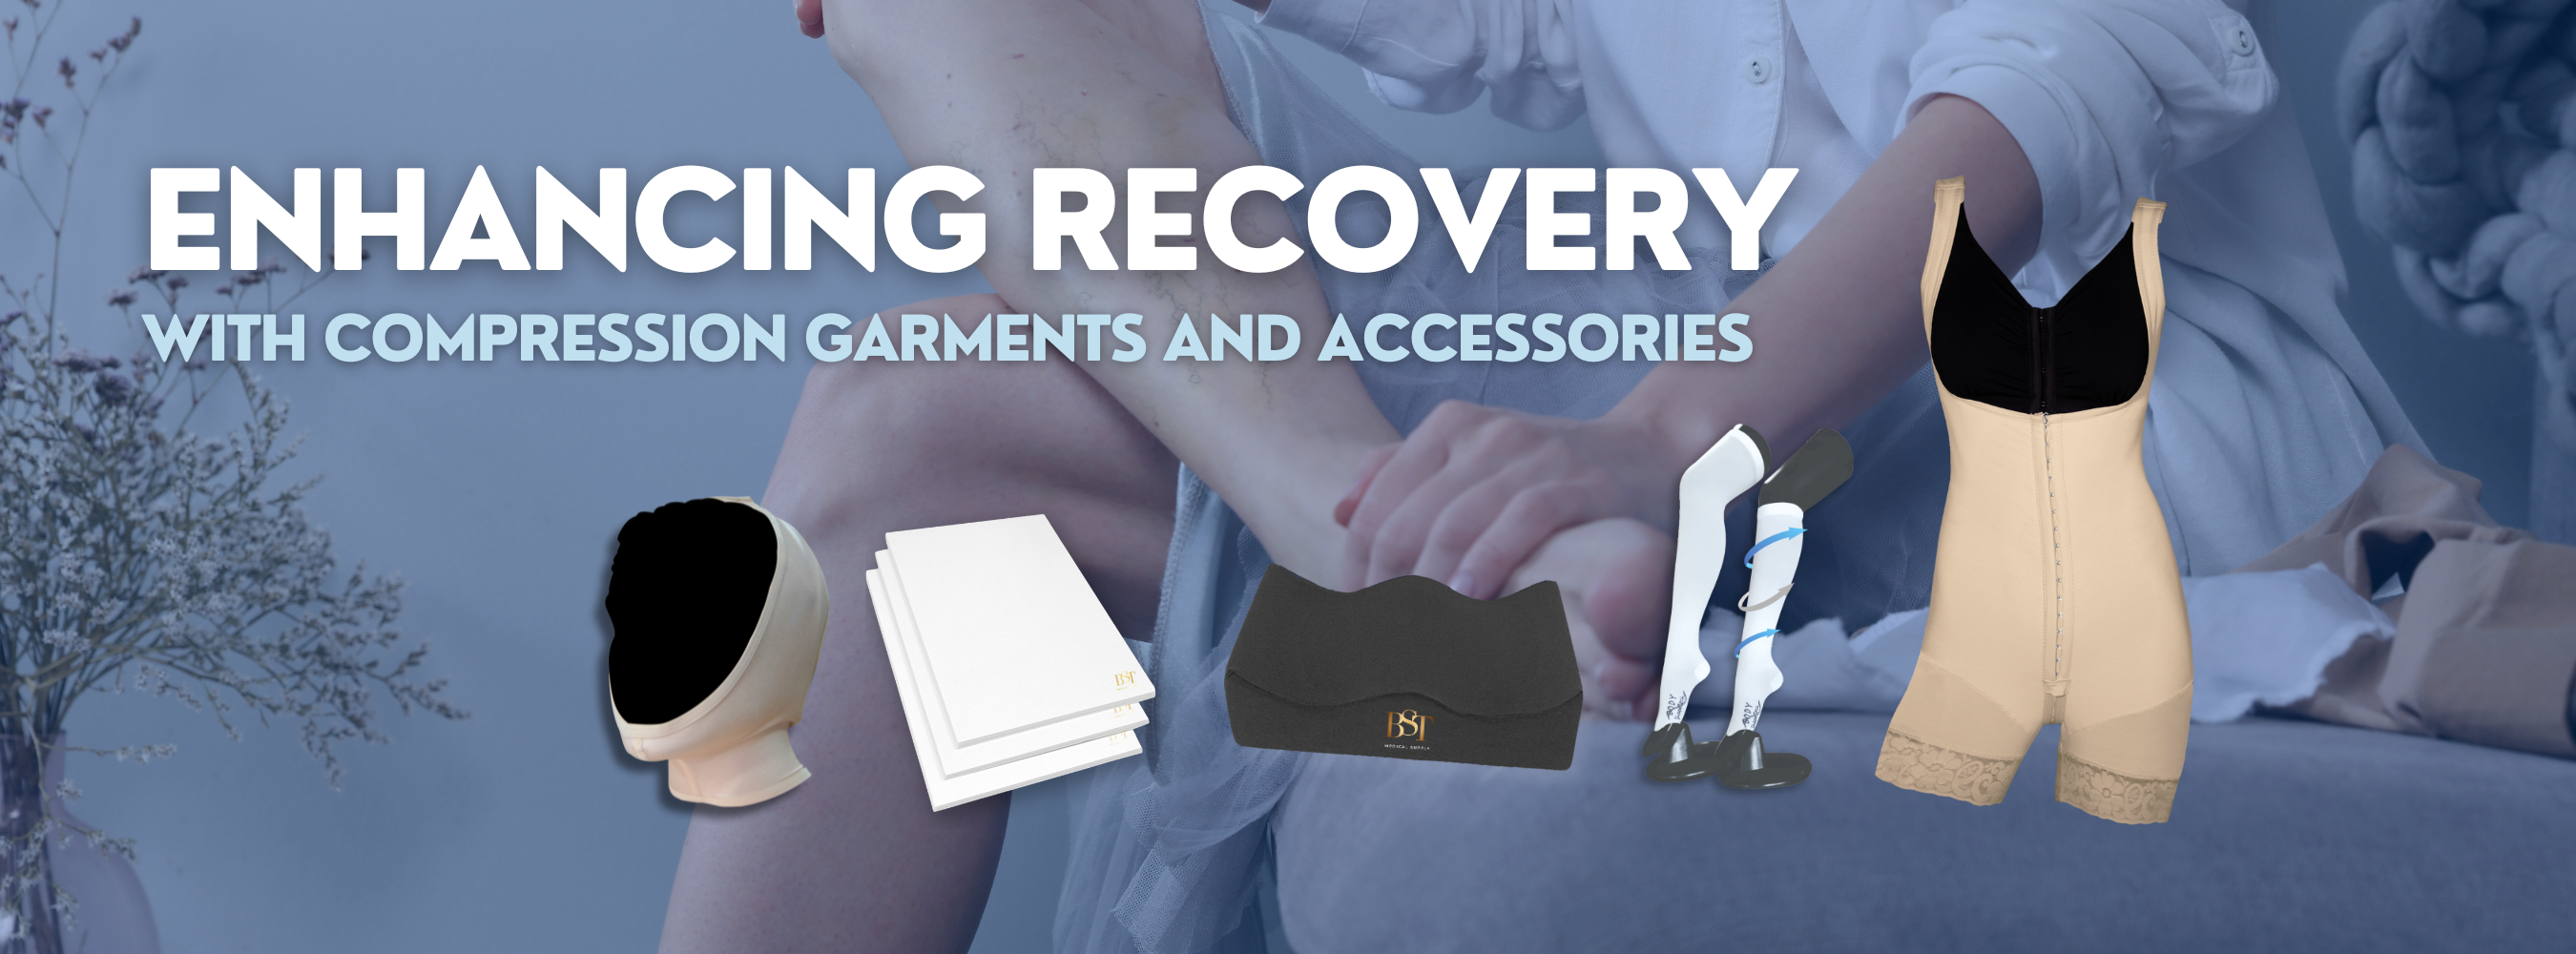 Enhancing Recovery with Compression Garments and Accessories: The